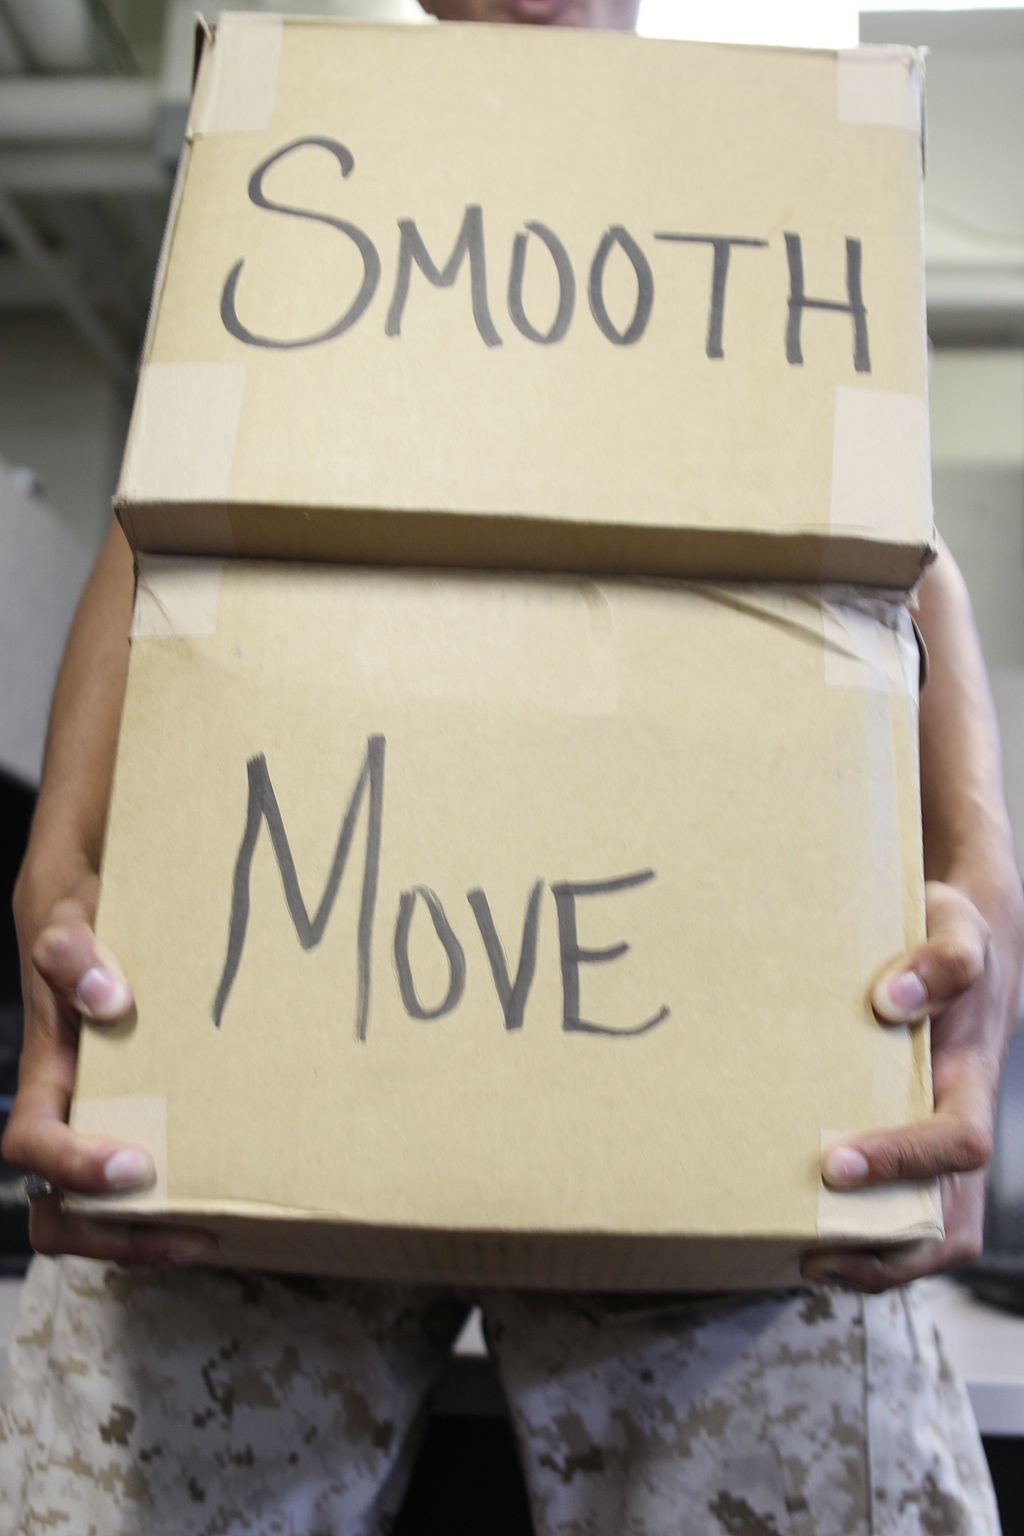 Smooth Move Workshop promotes seamless transition 110427 M IV598 002 1